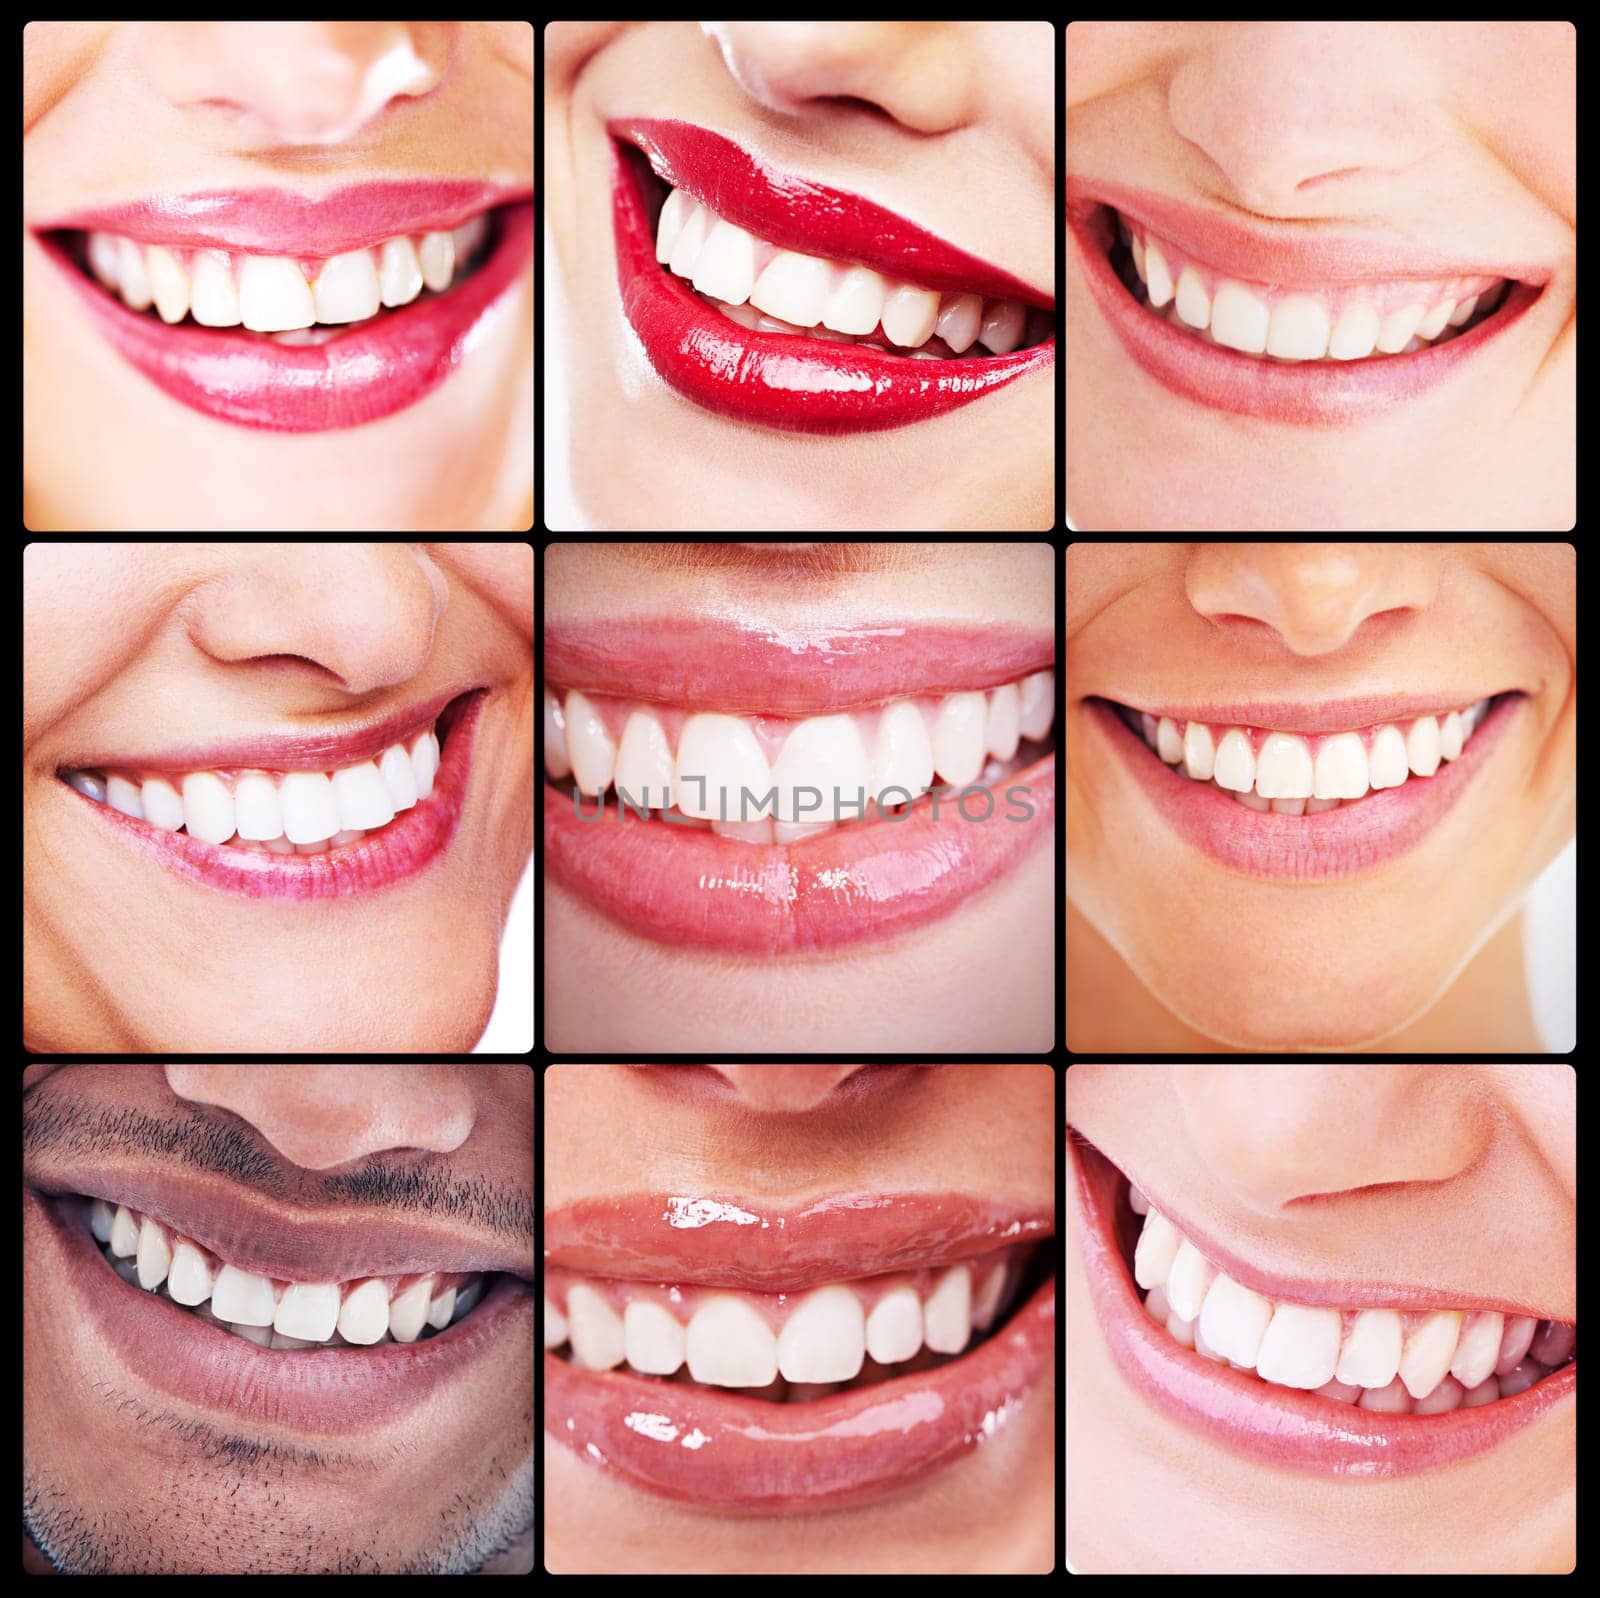 Dentistry, health and collage of teeth smiles with dental wellness and fresh mouth routine. Self care, cosmetic and montage of a diverse group of people with a clean, healthy and organic oral hygiene by YuriArcurs